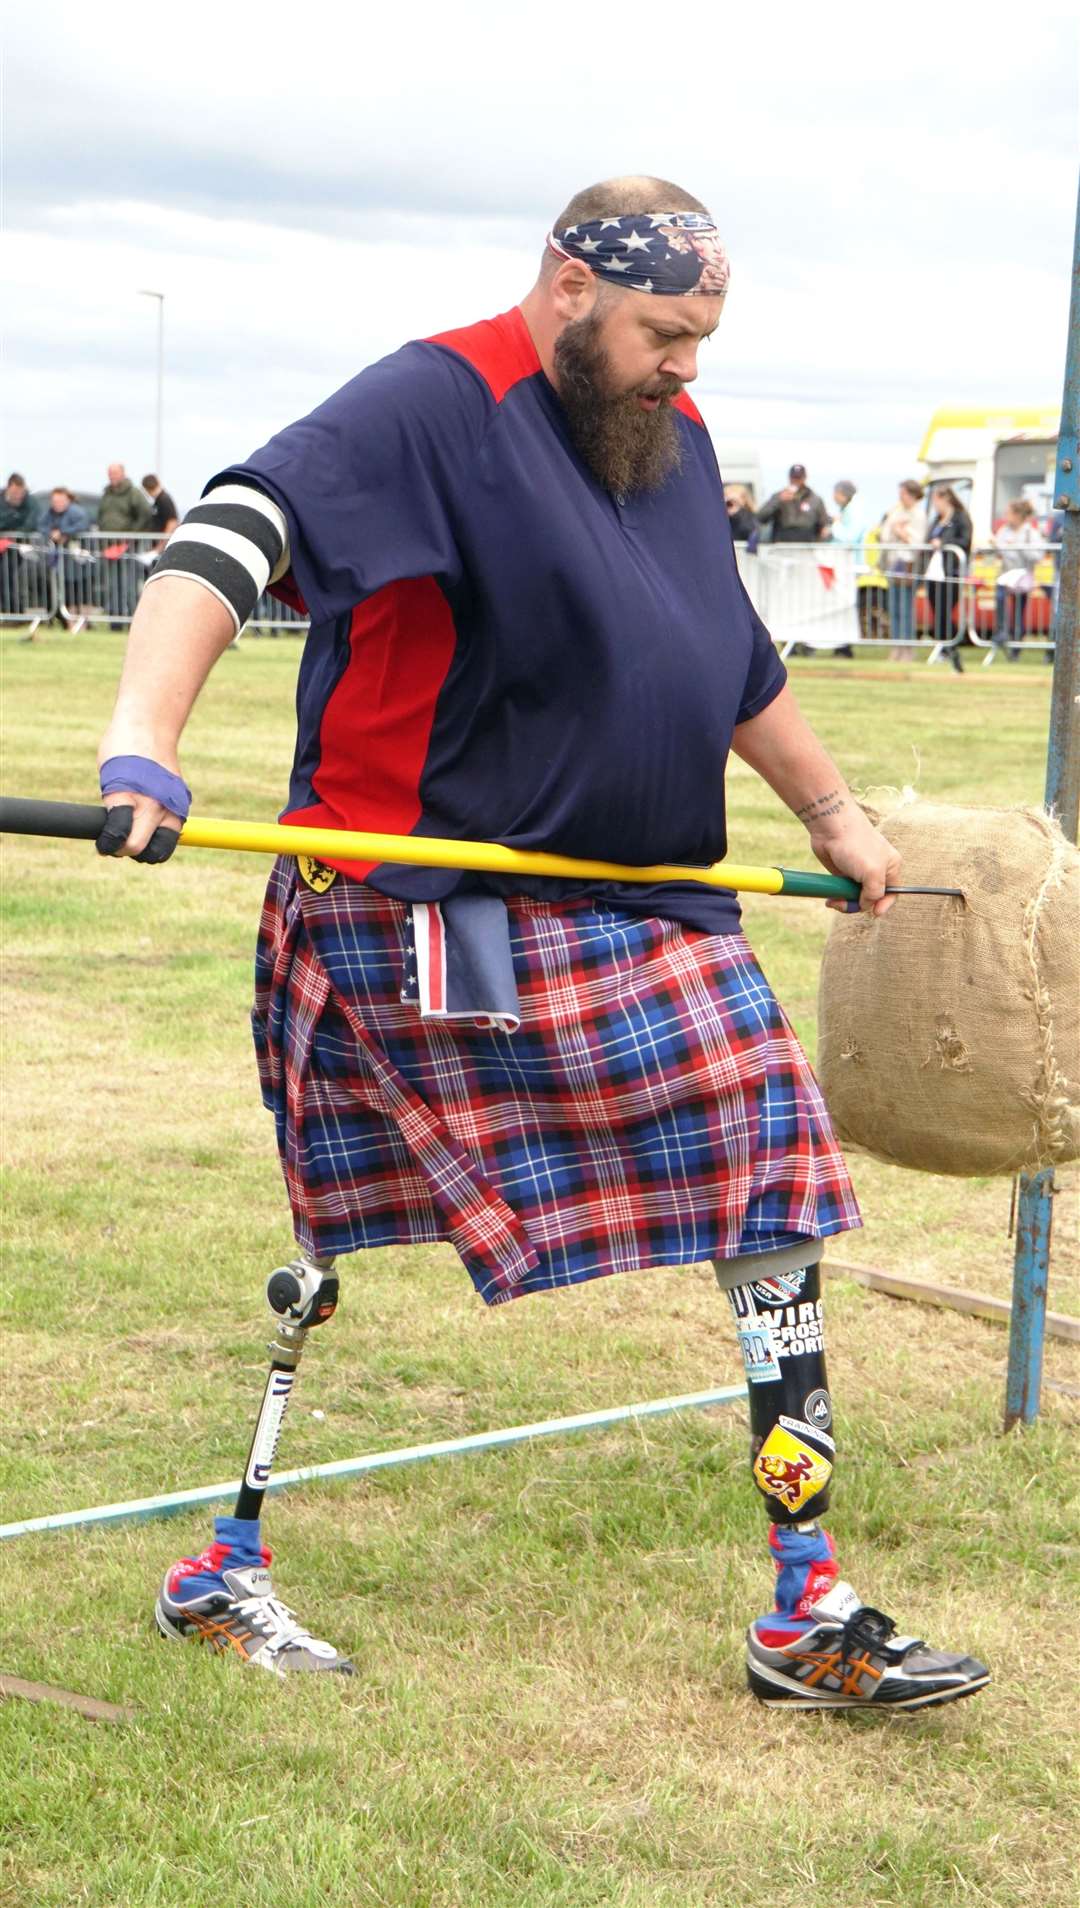 Double amputee Matthew Hall broke world records at last year's Mey Games. Pictures: DGS